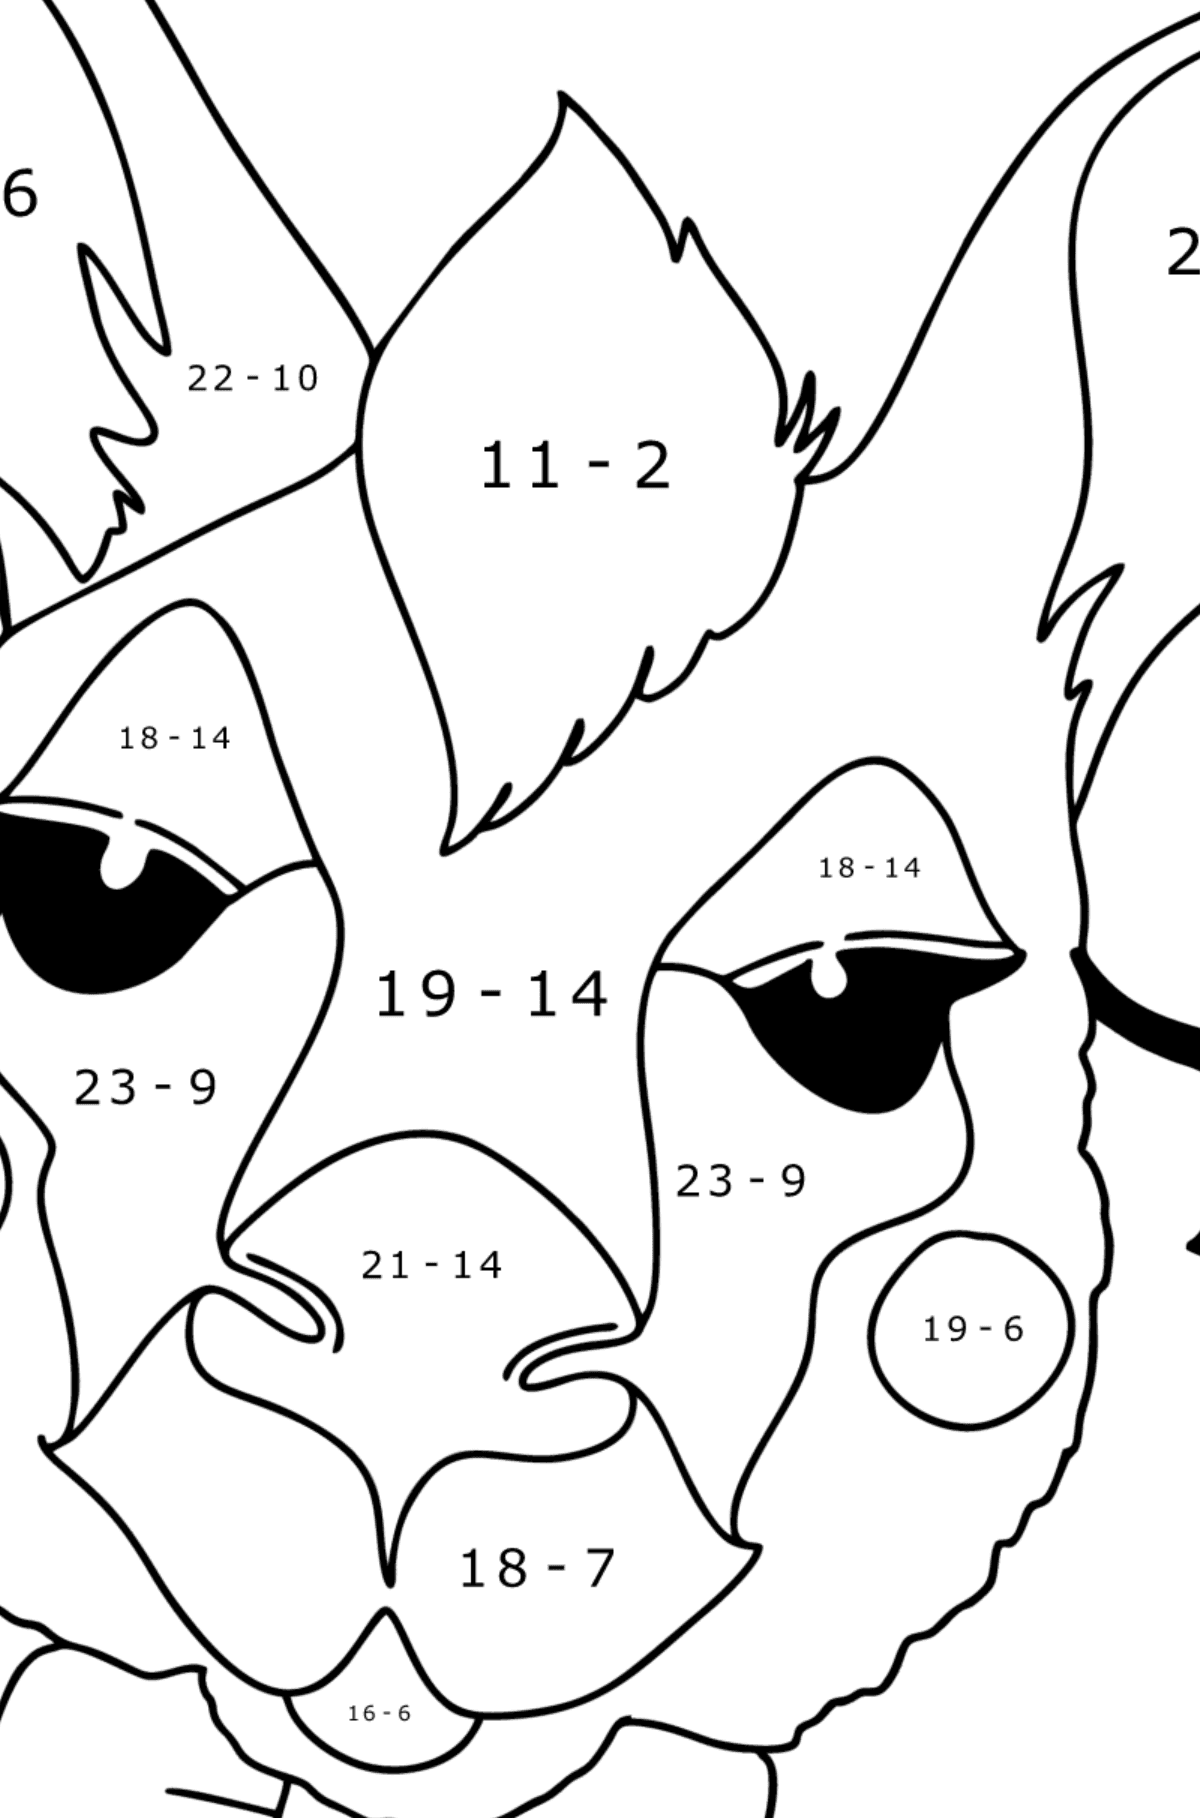 Kangaroo Mask coloring page - Math Coloring - Subtraction for Kids